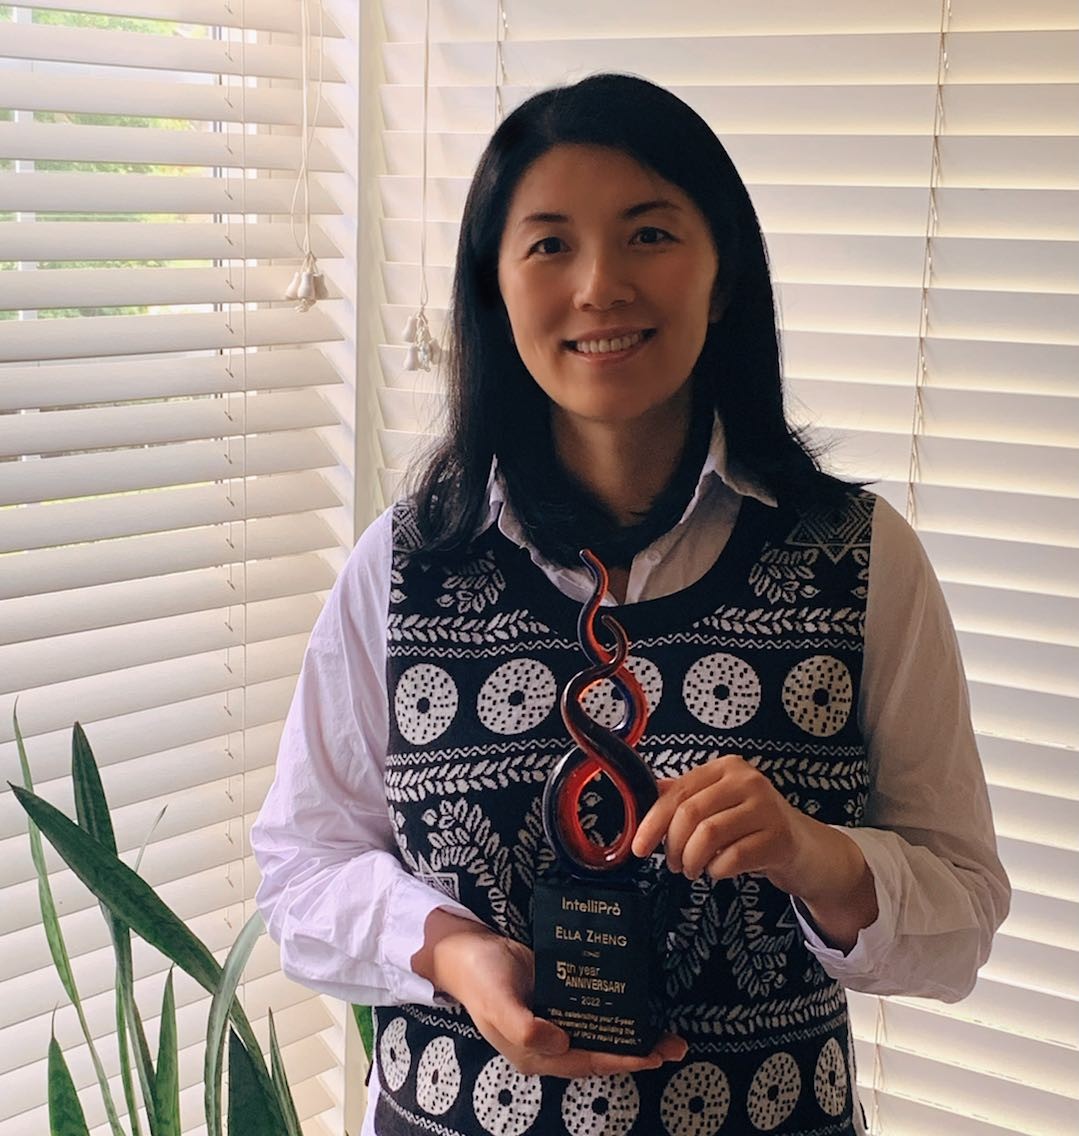 COO, Ella Zhang, recognition for five years of service